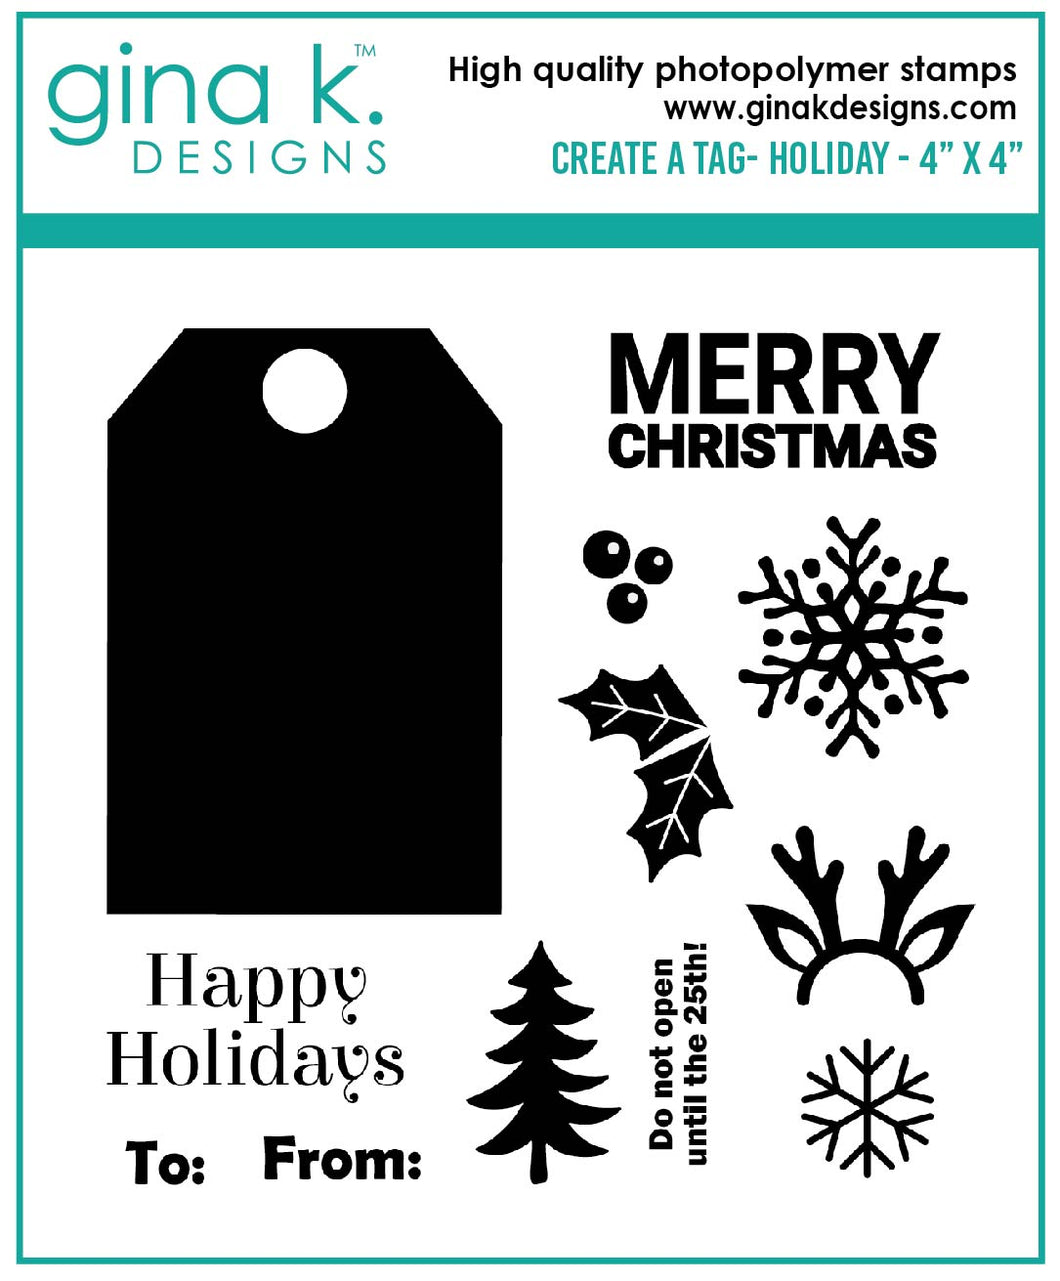 Gina K. Designs - Stamps - Create a Tag - Holiday. Create a Tag- Holiday is a stamp set by Gina K Designs. This set is made of premium clear photopolymer and measures 4